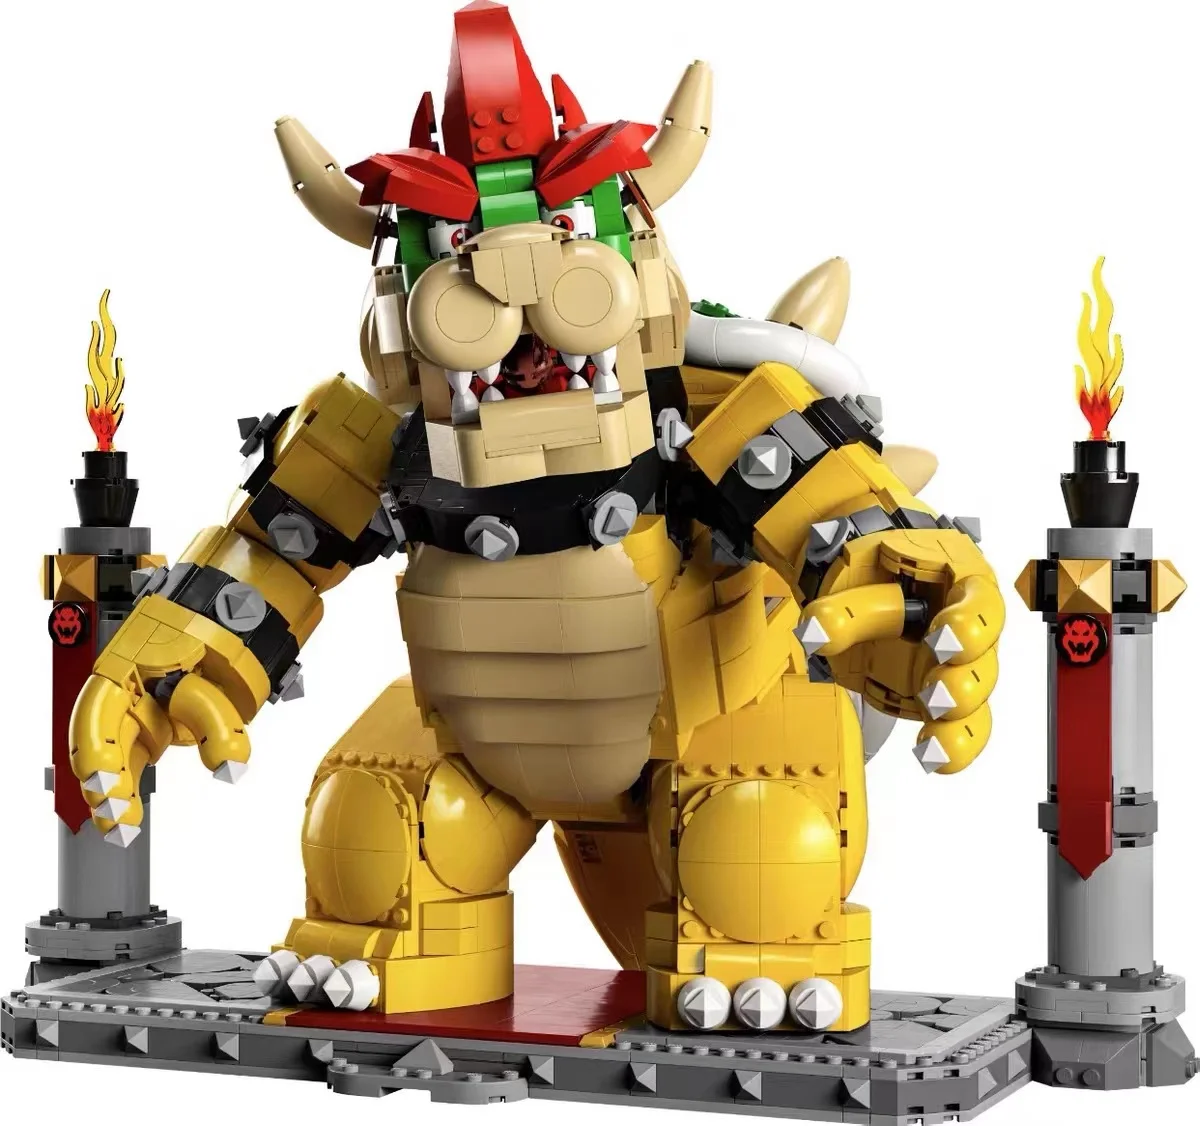 

2022 NEW Super The Mighty Bowser Compatible 71411 Building Blocks Kit MOC Bricks Toys Children Birthday christmas Gift 2807pcs